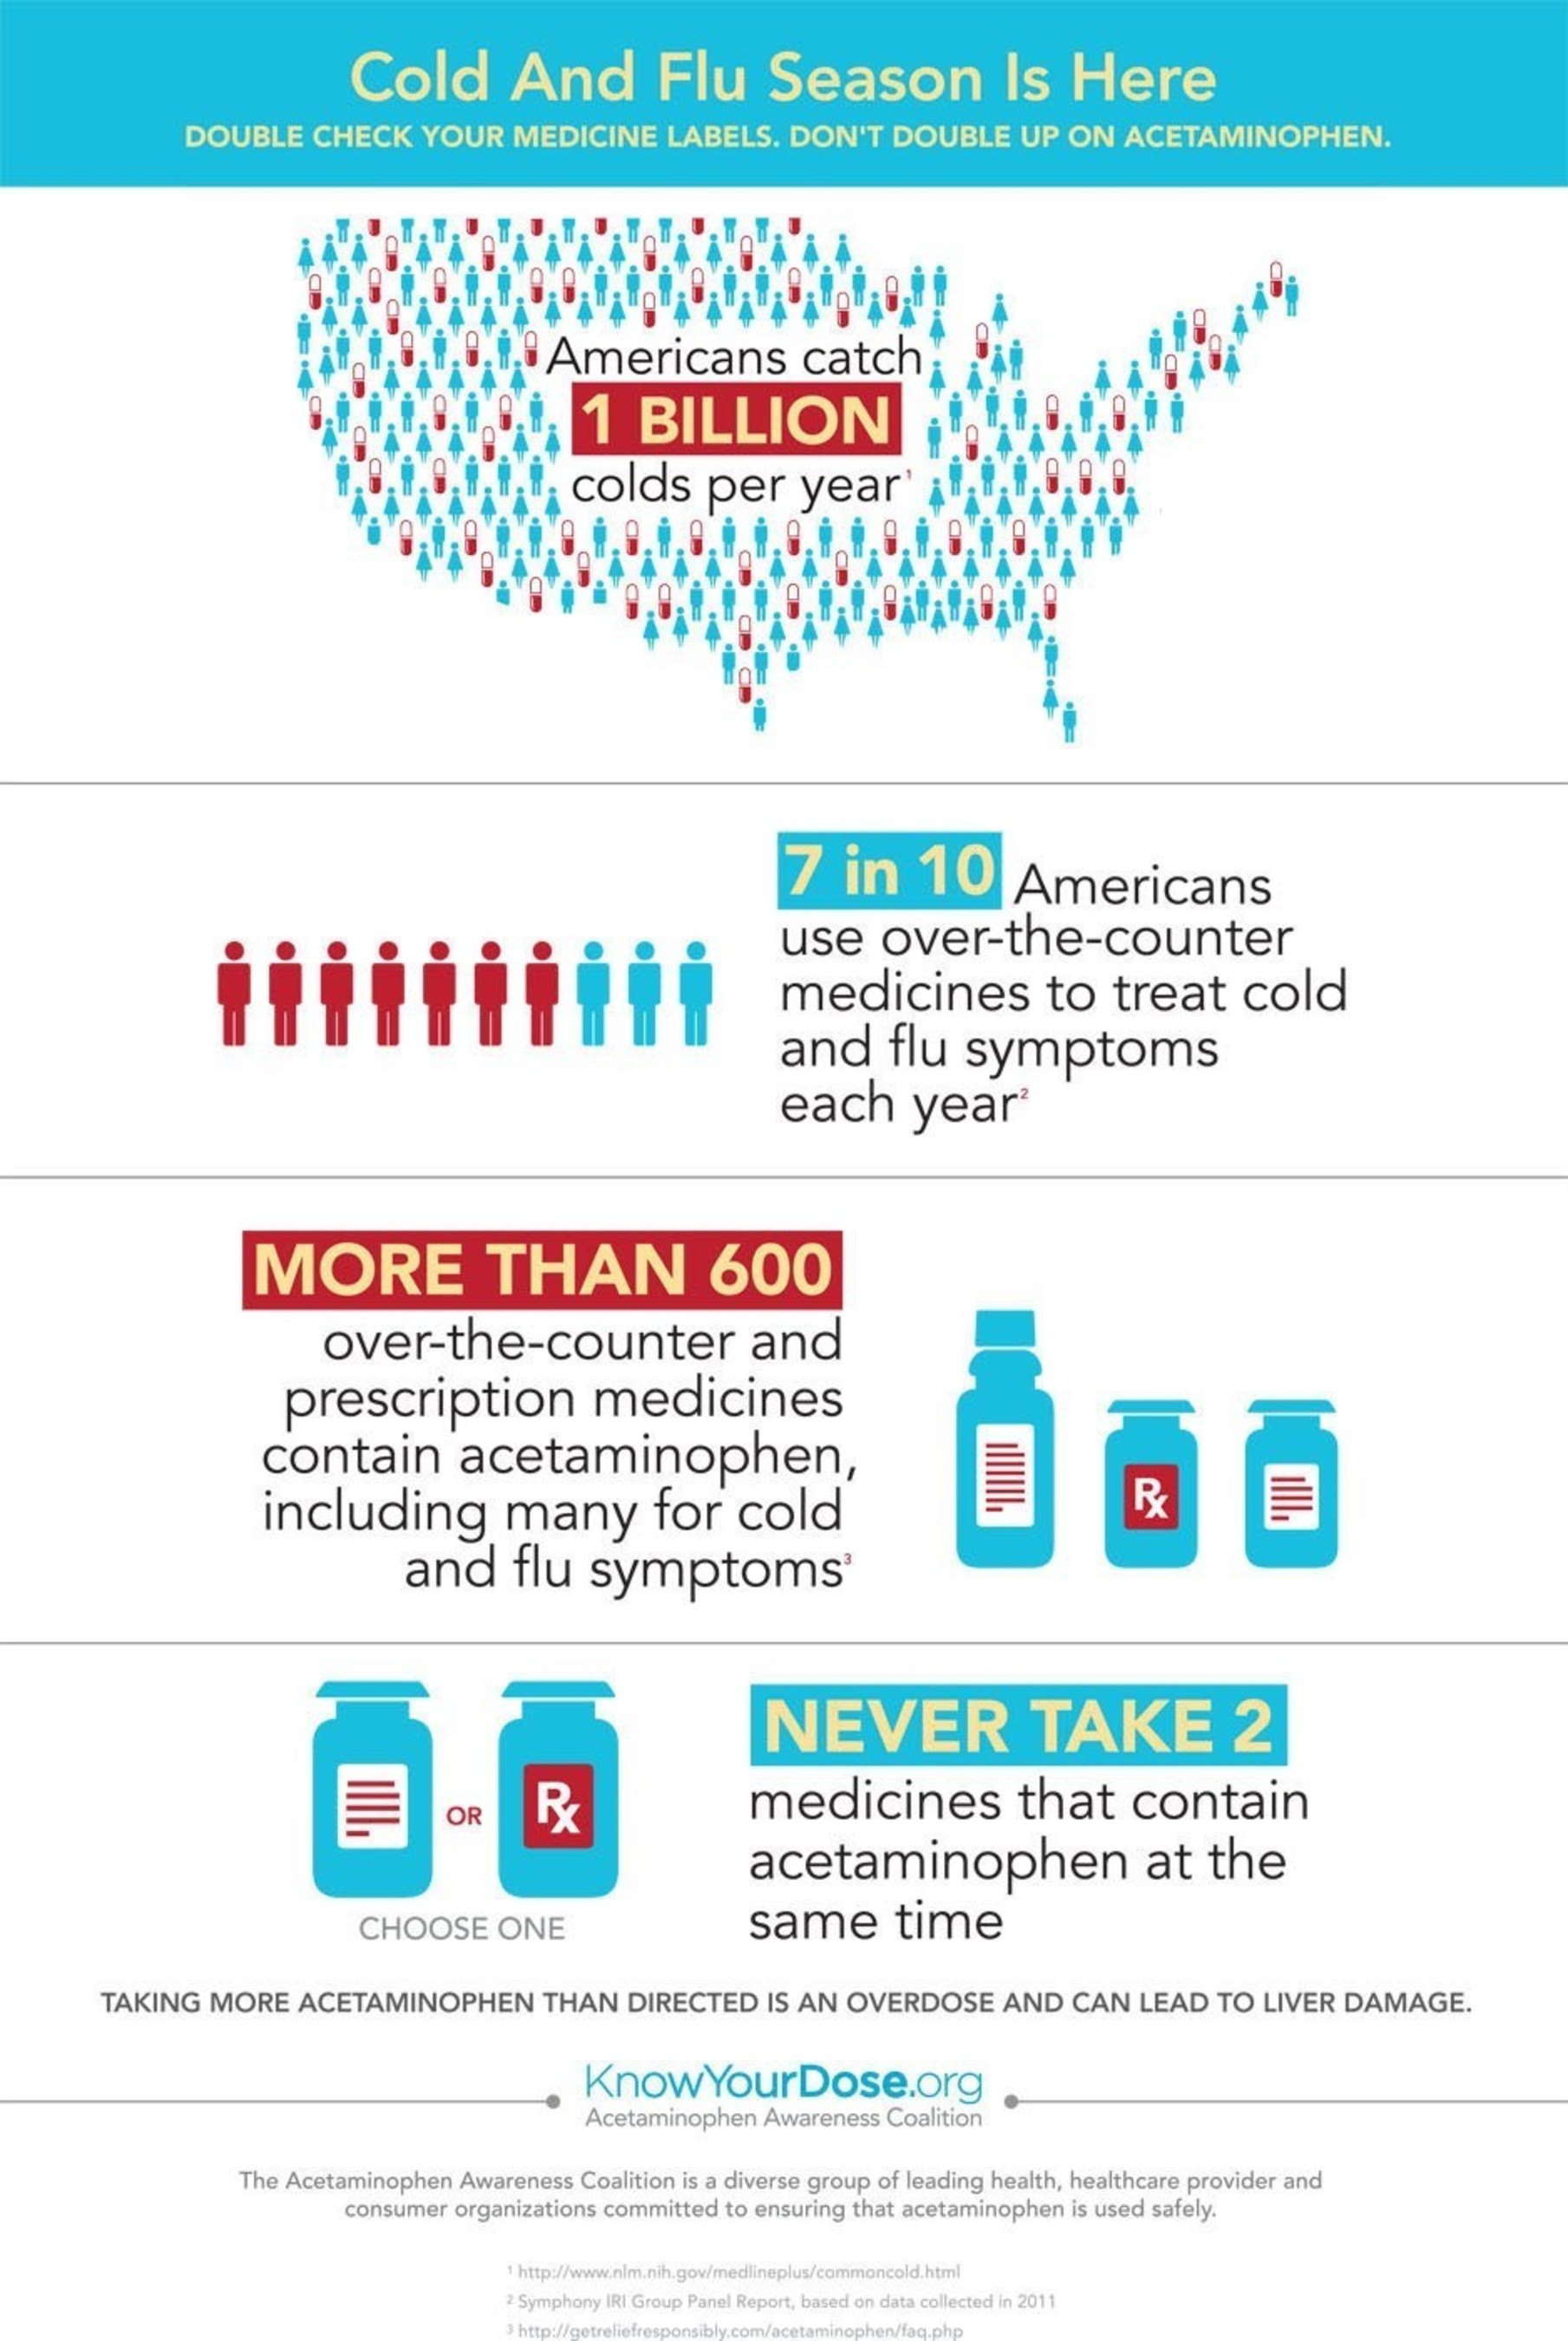 Double check; Don't double up on acetaminophen. (PRNewsFoto/Acetaminophen Awareness Coalition)